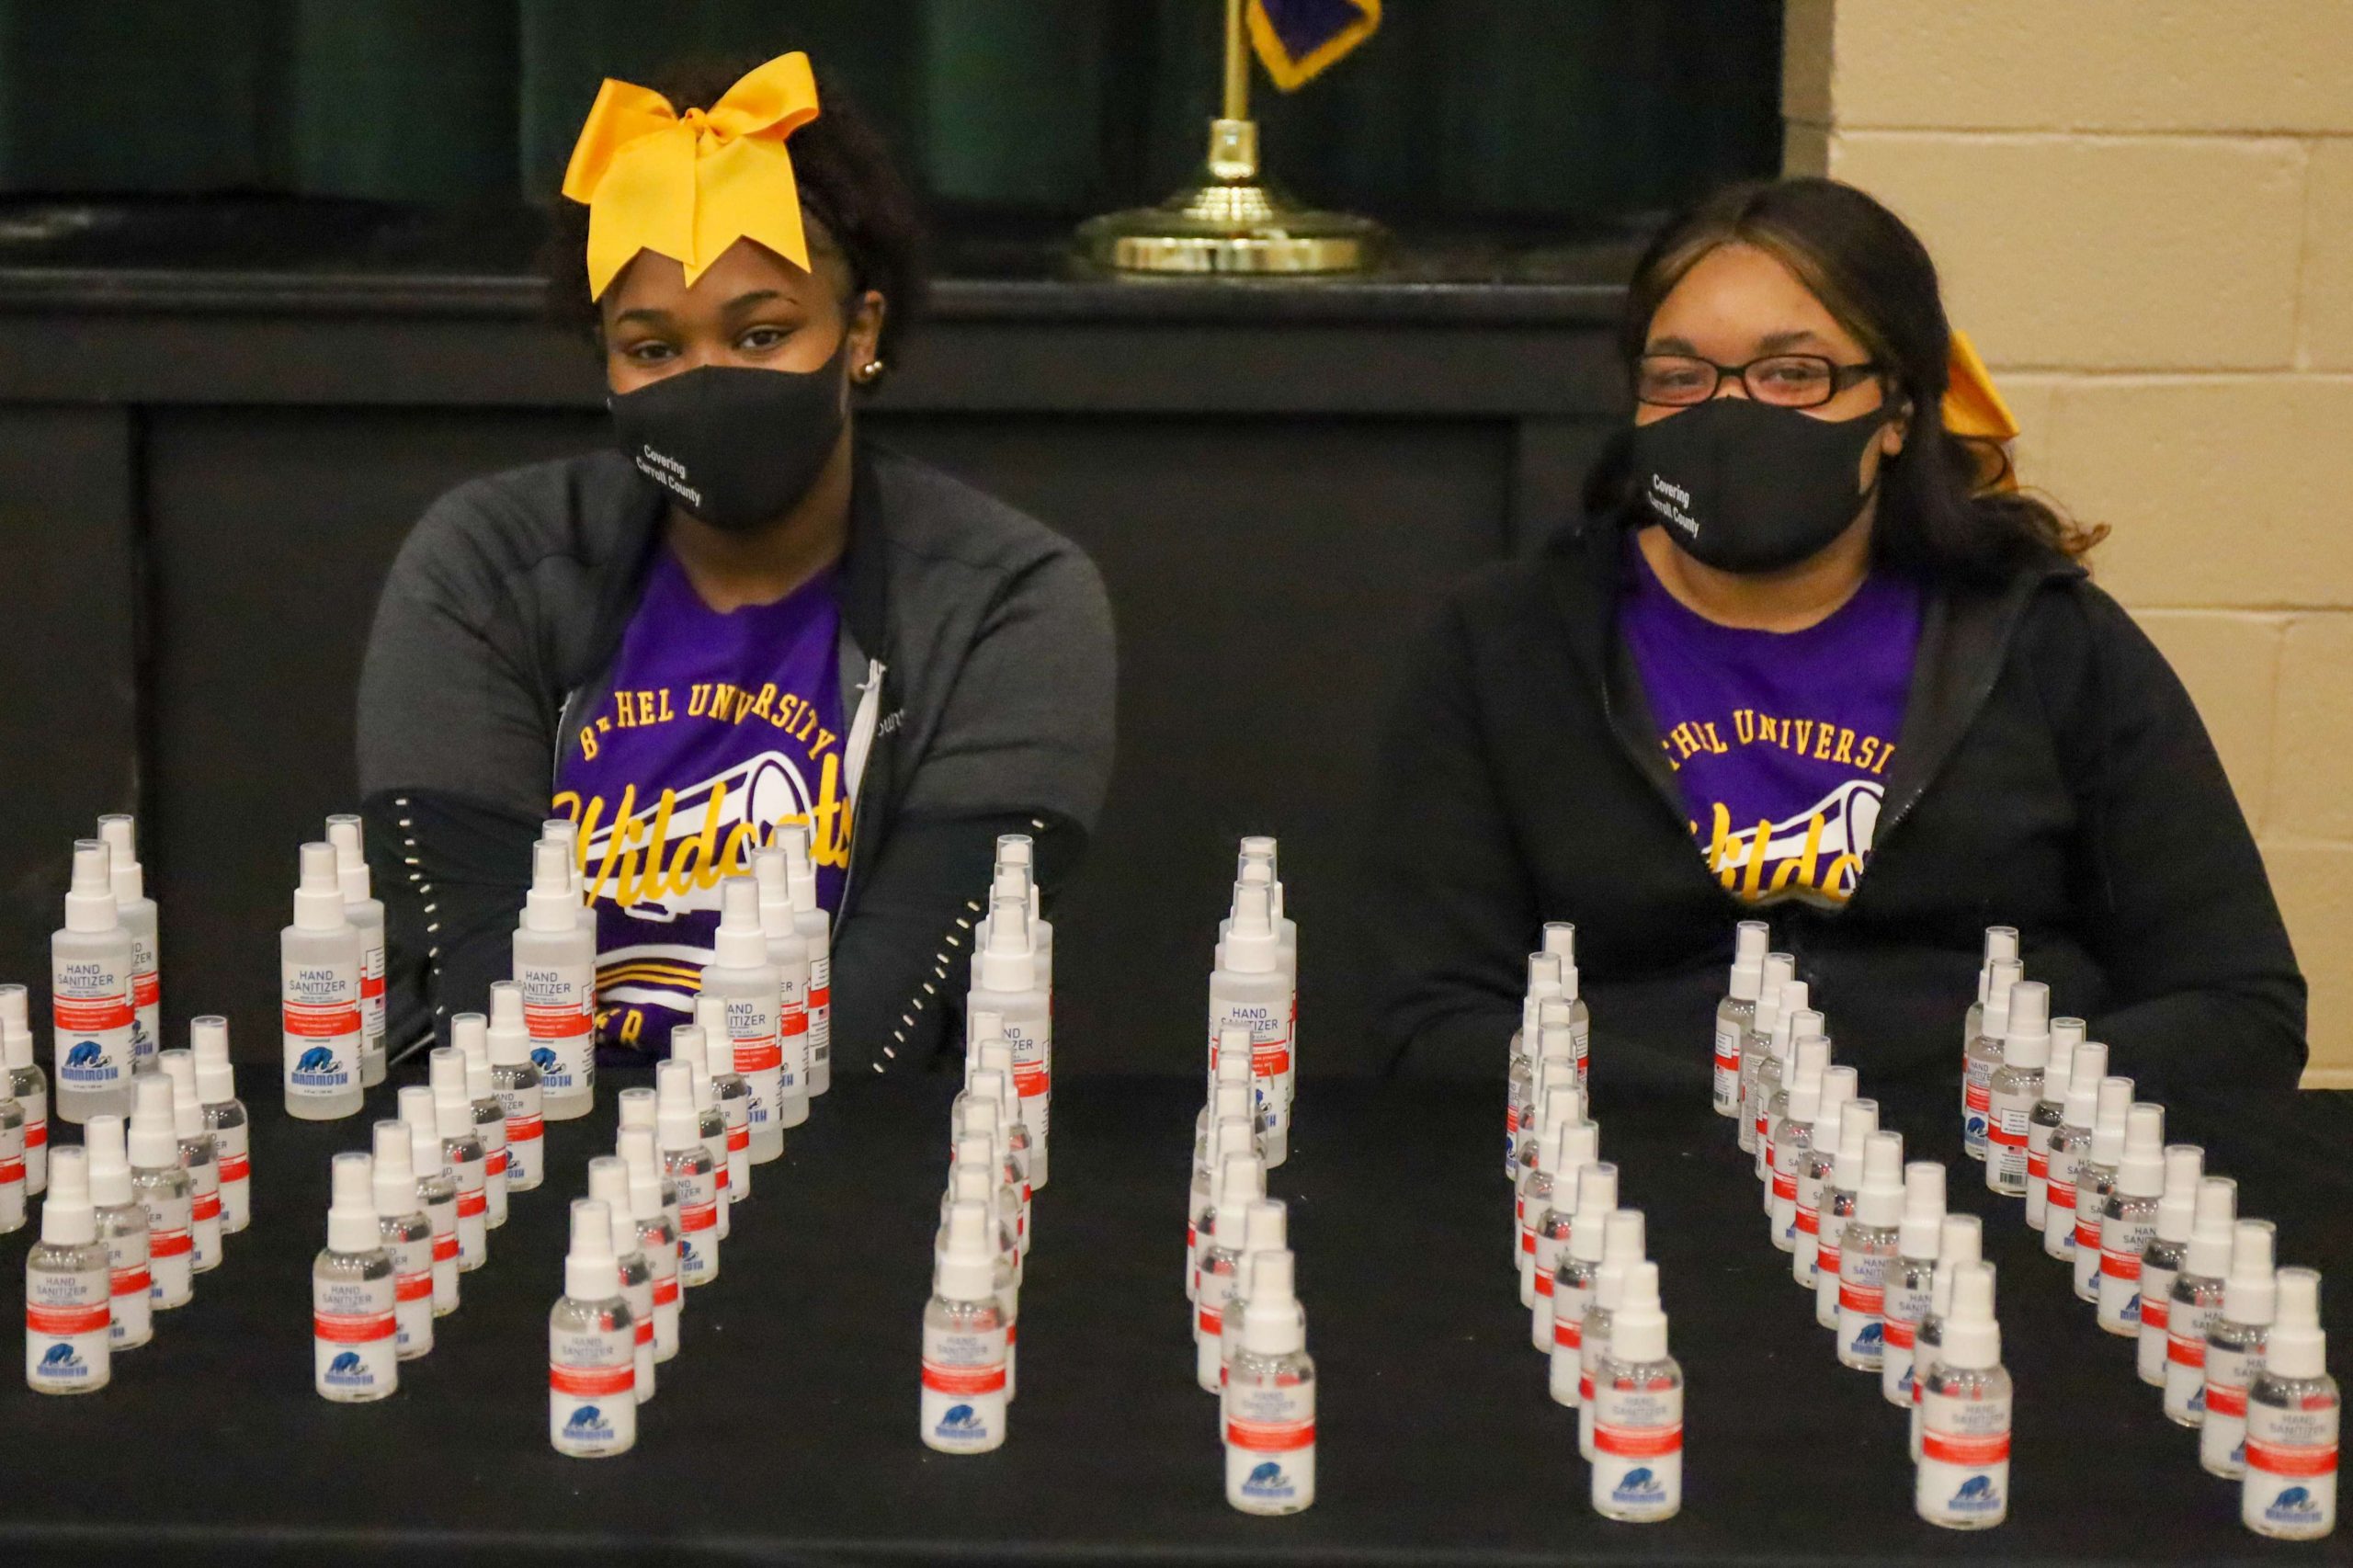 The Bethel University Cheer Team was on hand to help pass out Mammoth hand sanitizer. 